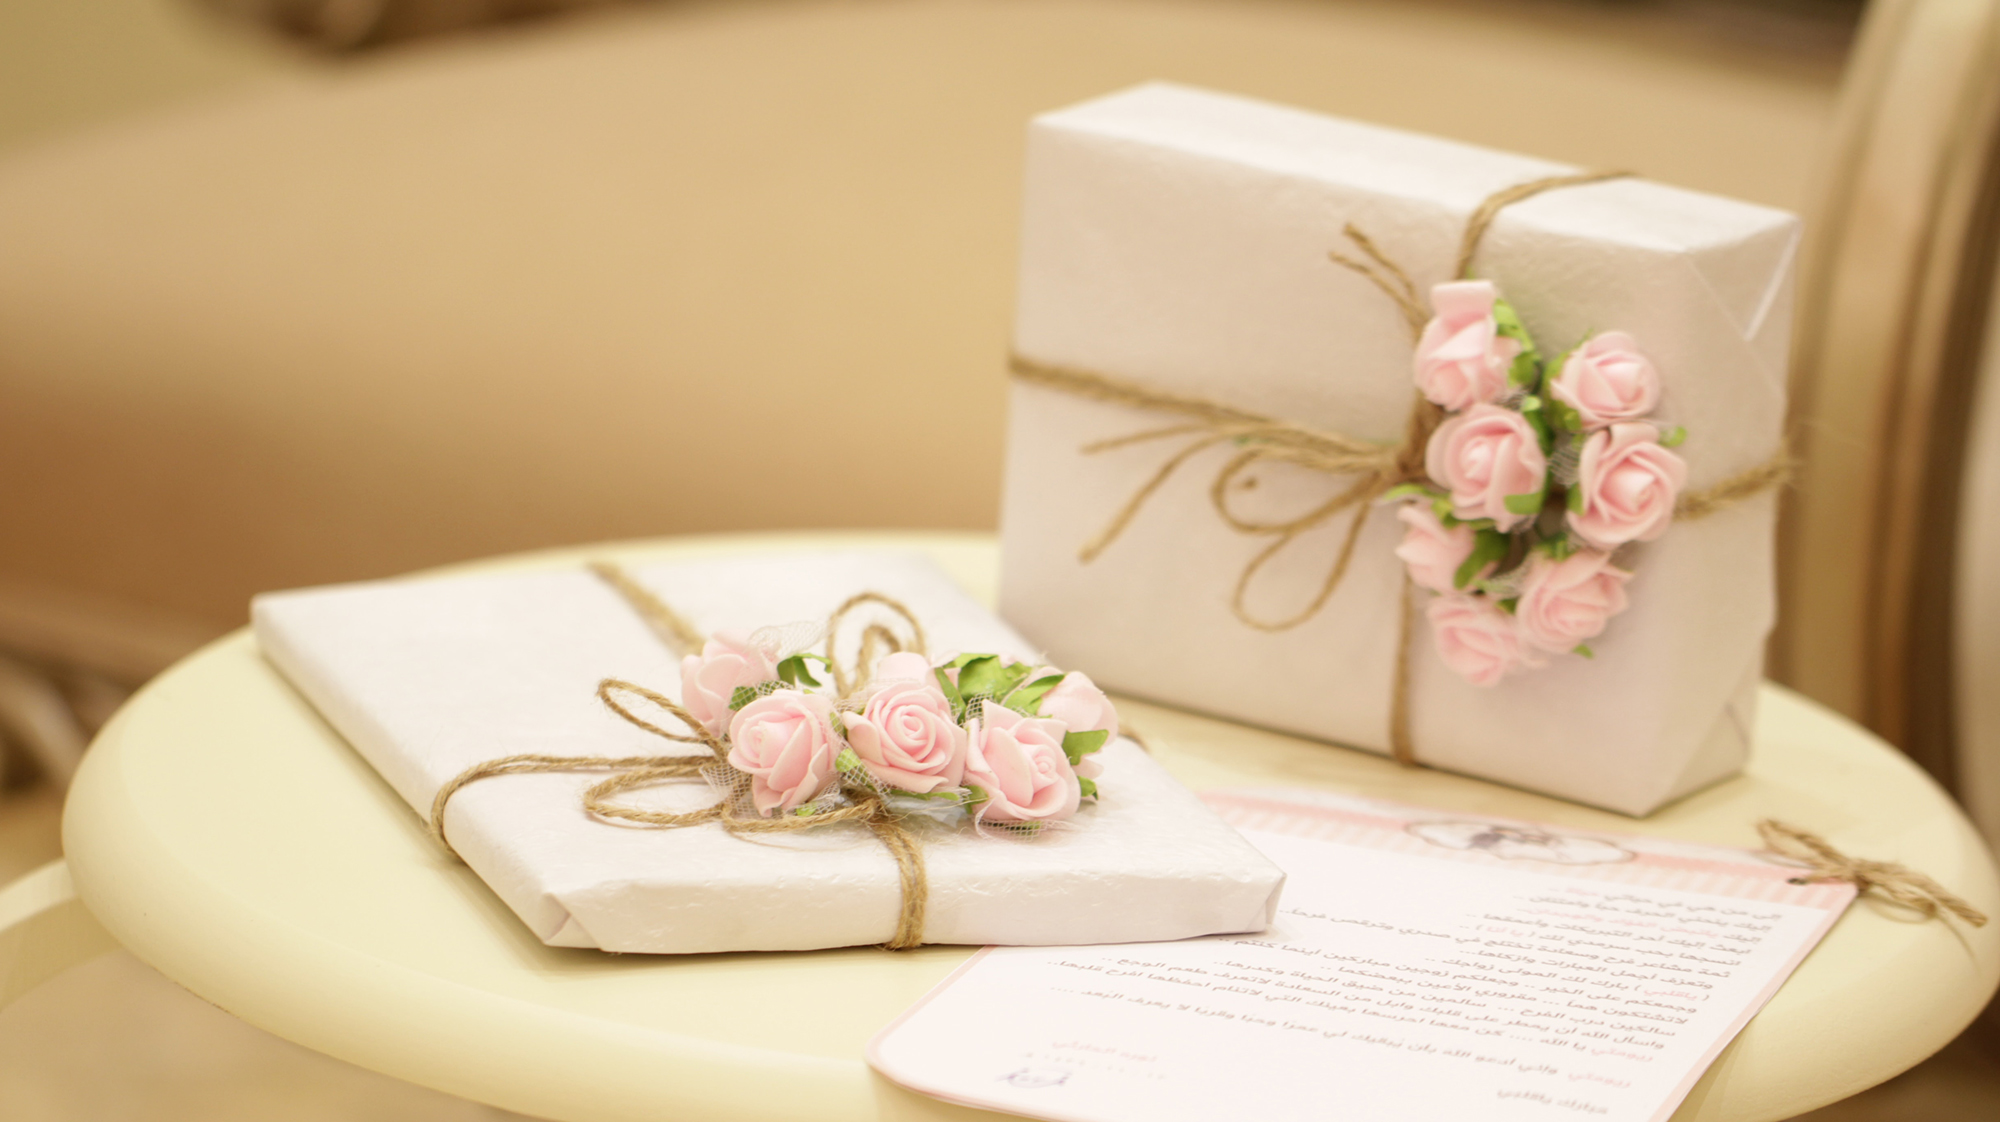 Wedding Gifts On Table